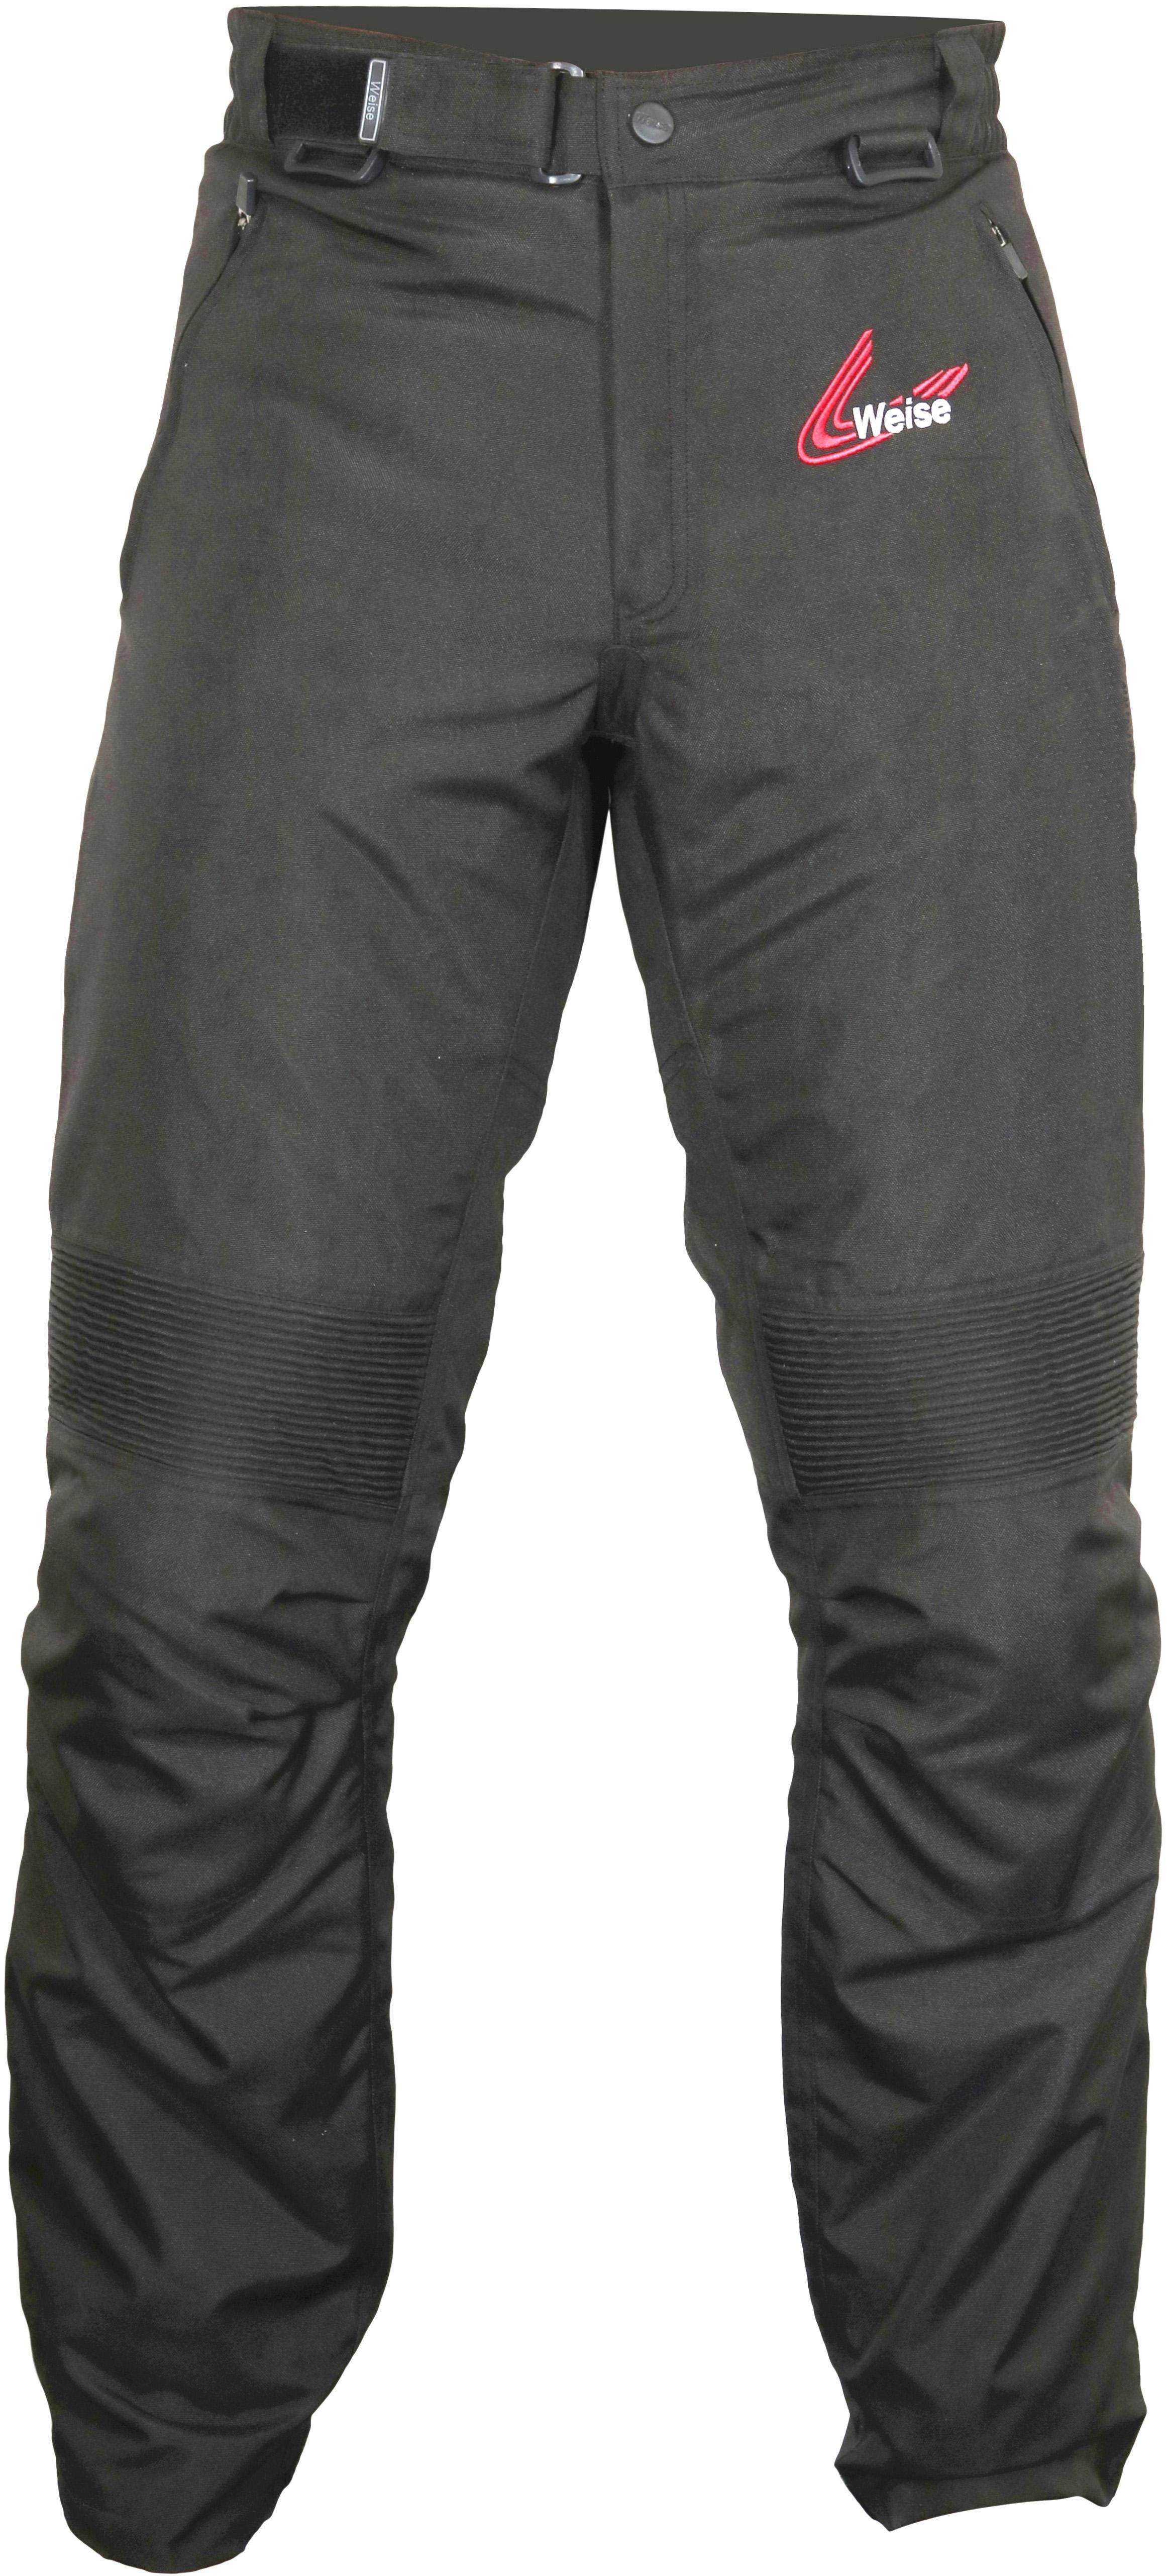 Weise Core Plus Motorcycle Jeans - Black, 5Xl